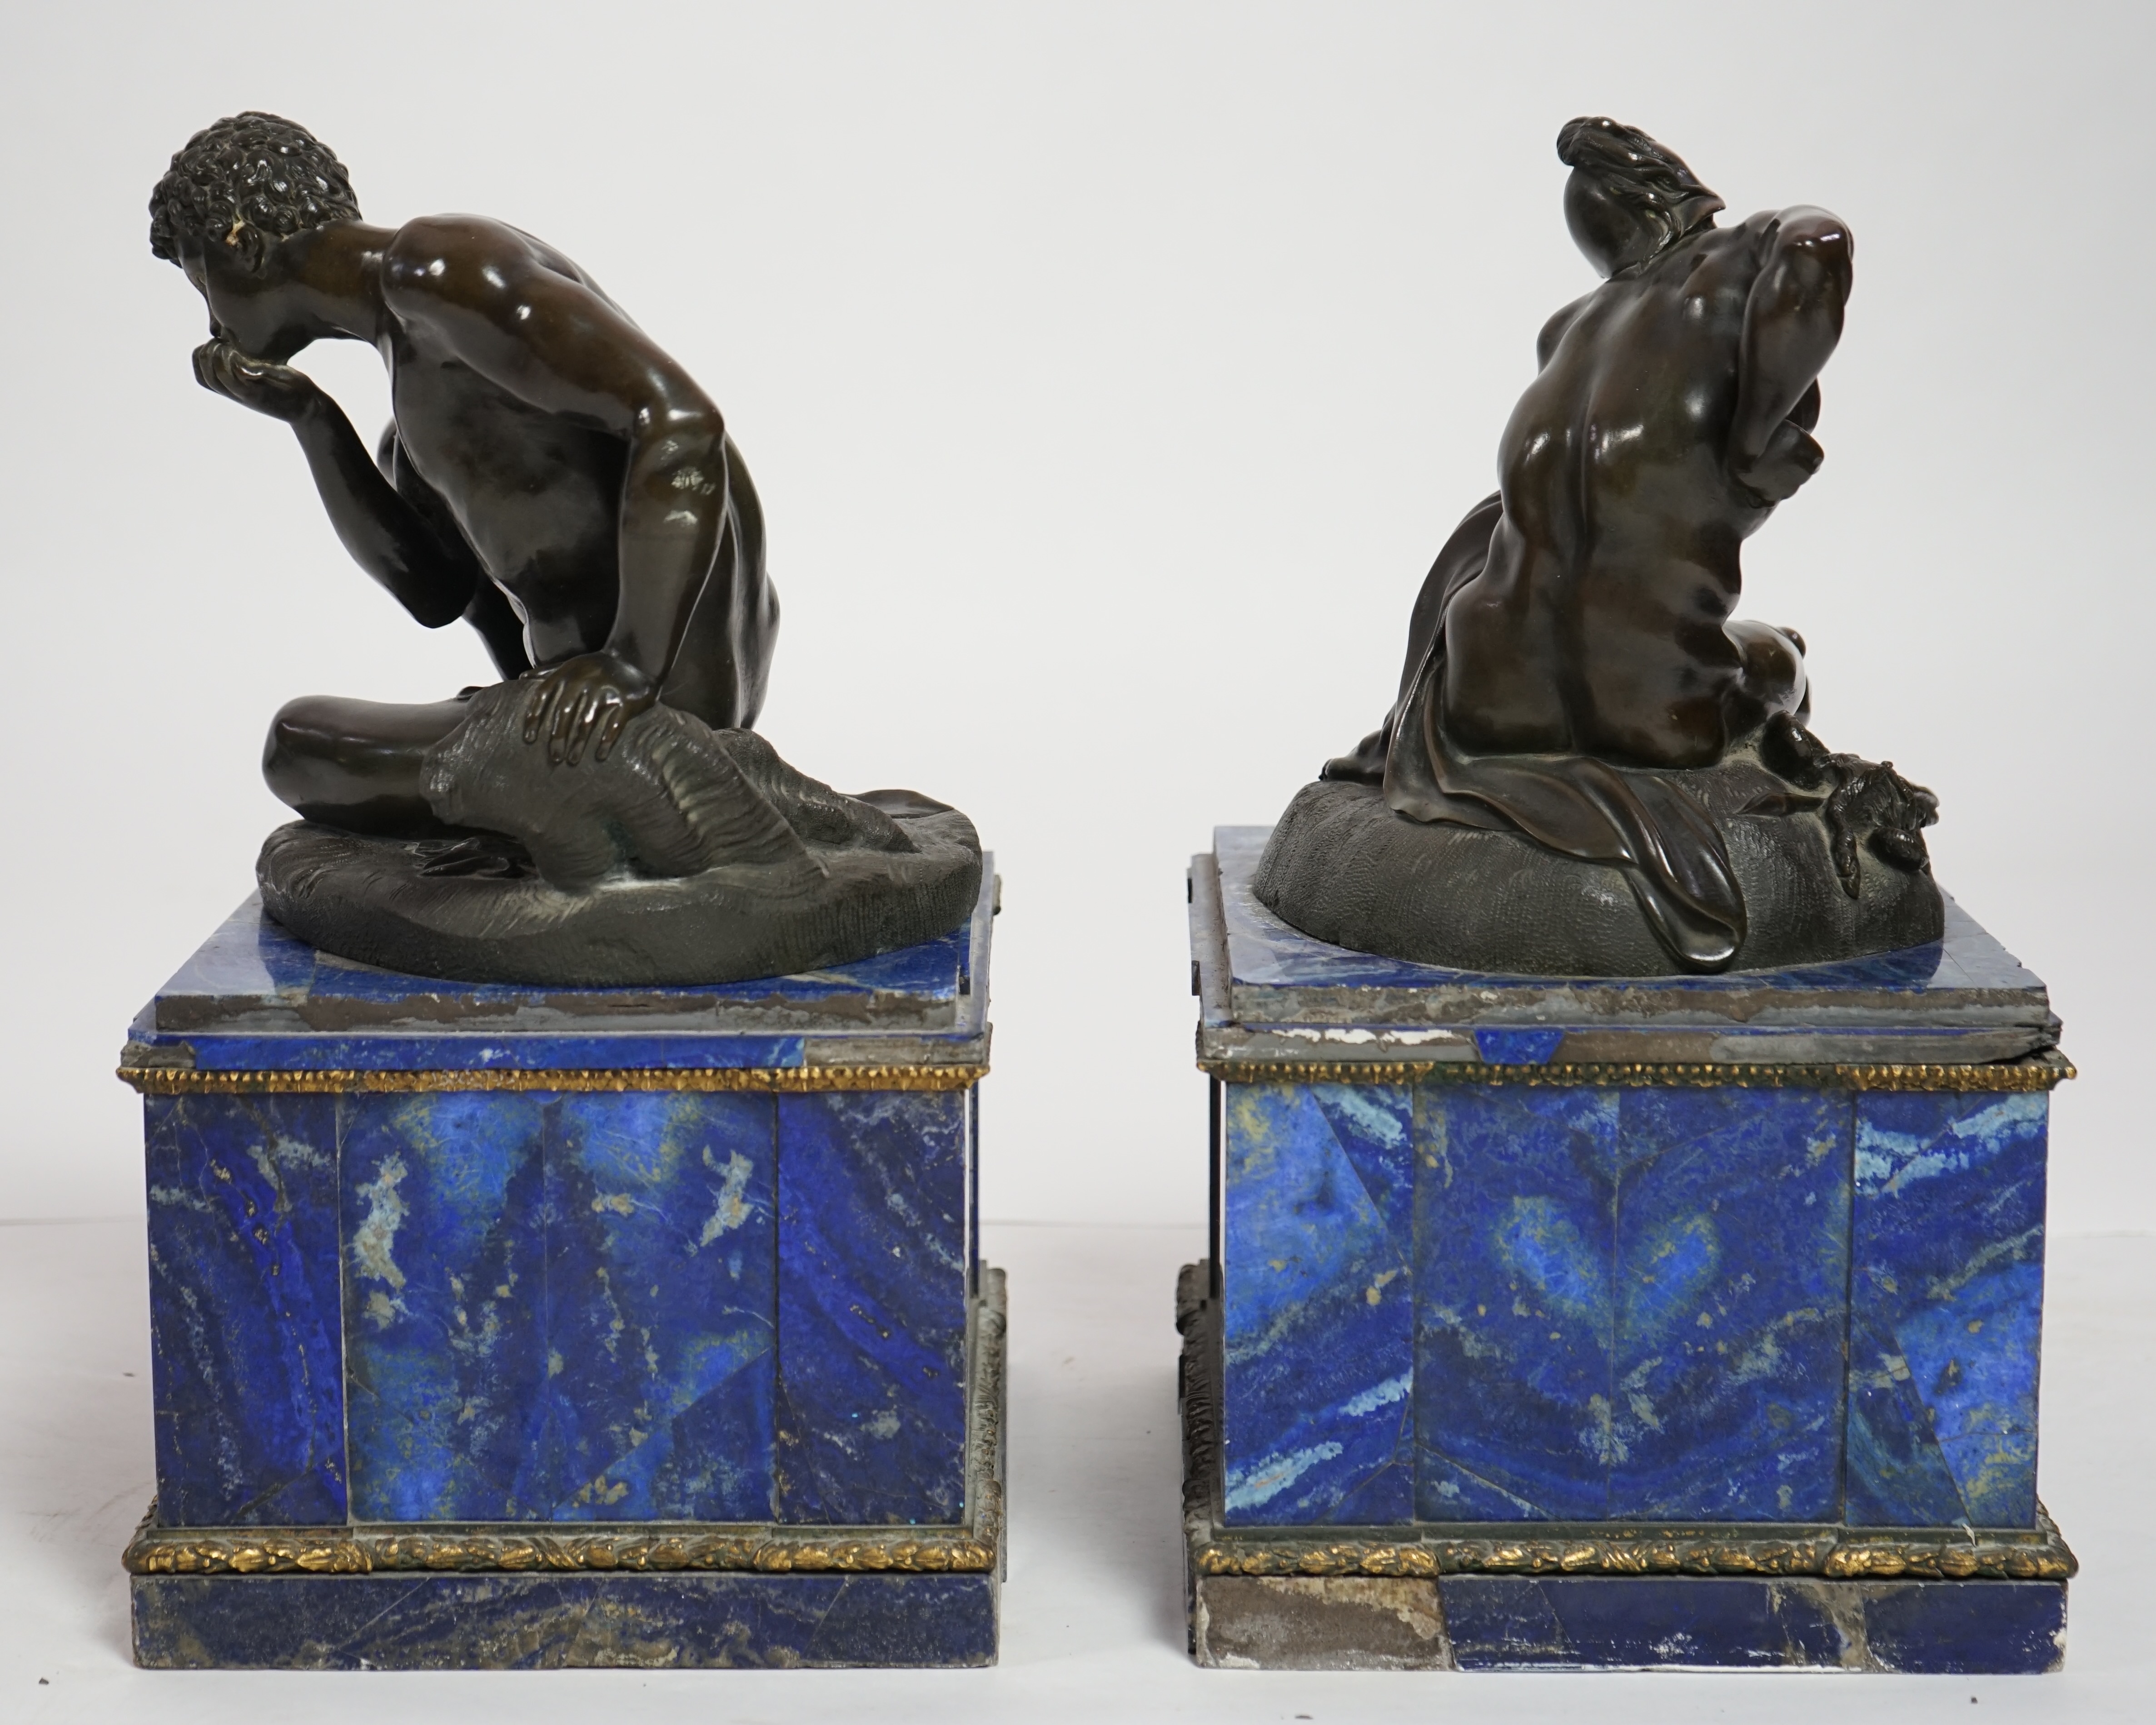 After the antique, a pair of late 18th/early 19th century Grand Tour souvenir bronze figures of seated warriors